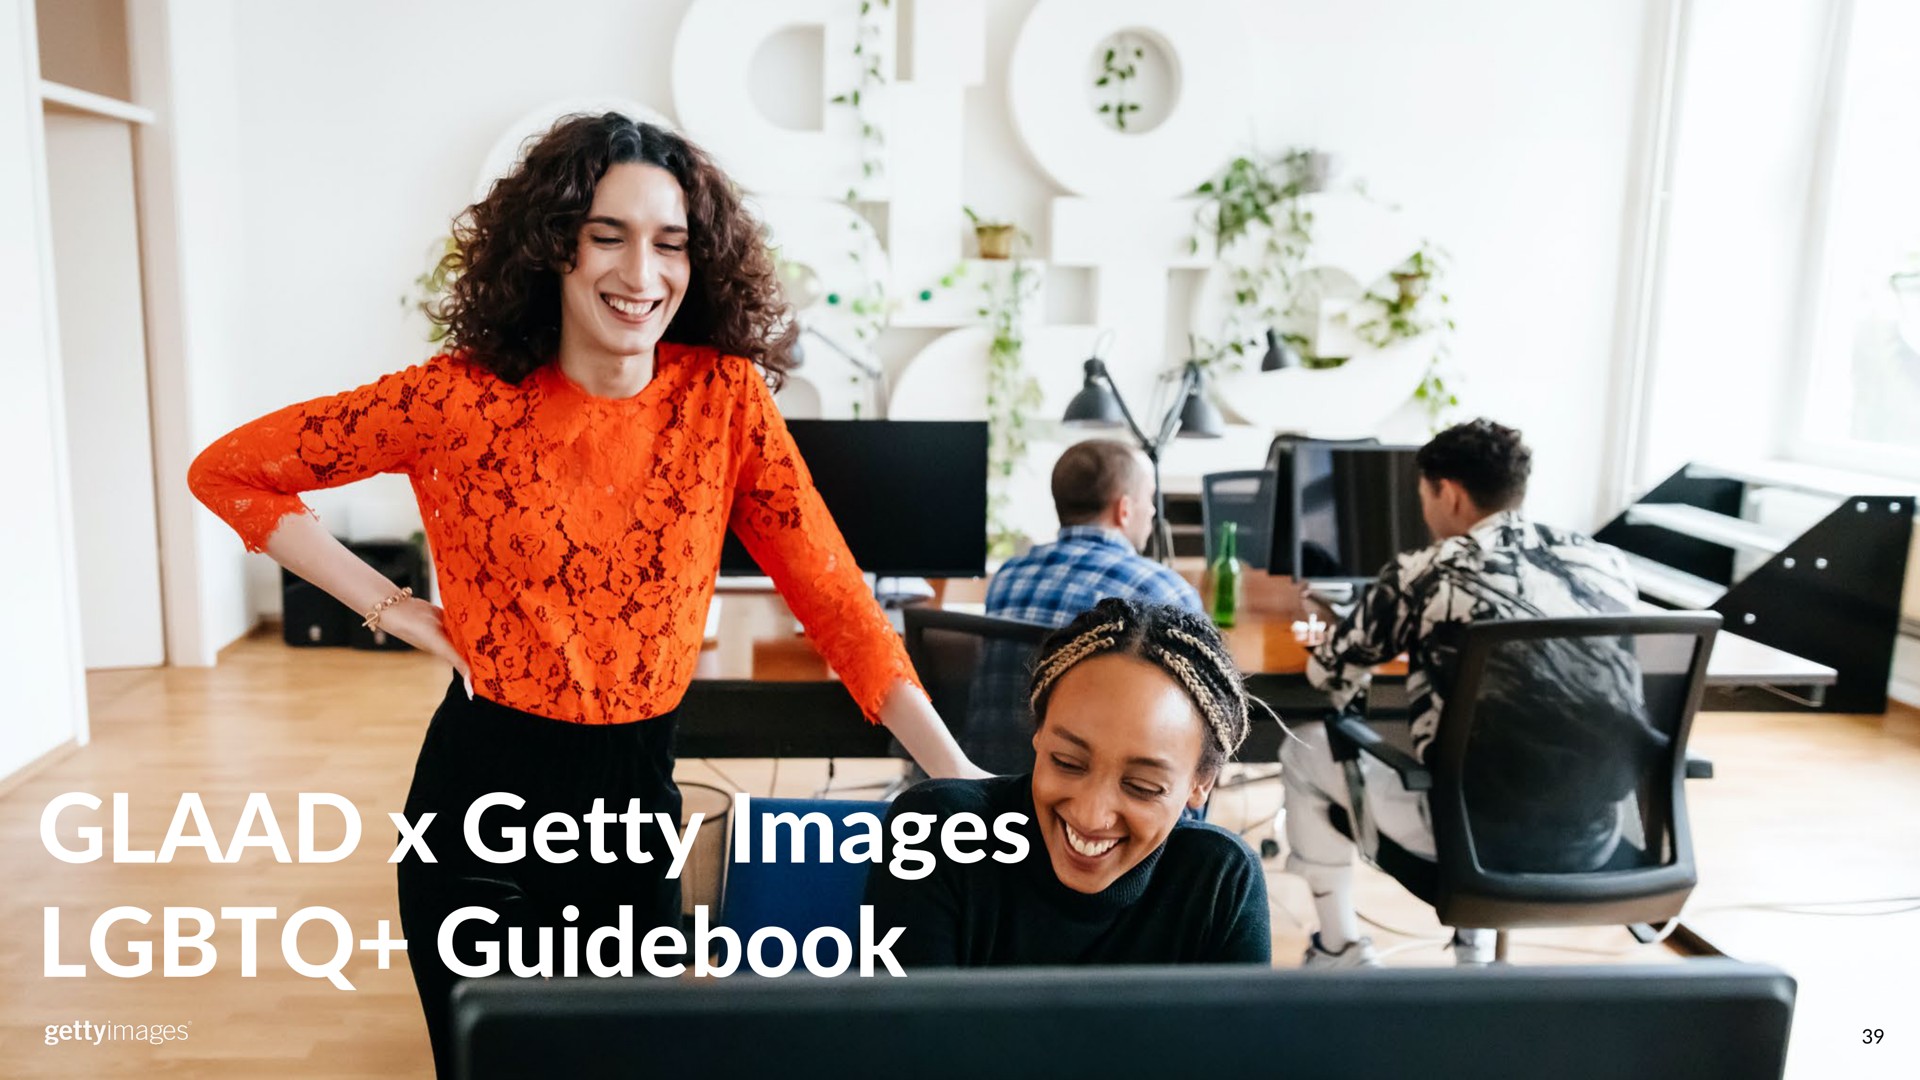 images guidebook a | Getty